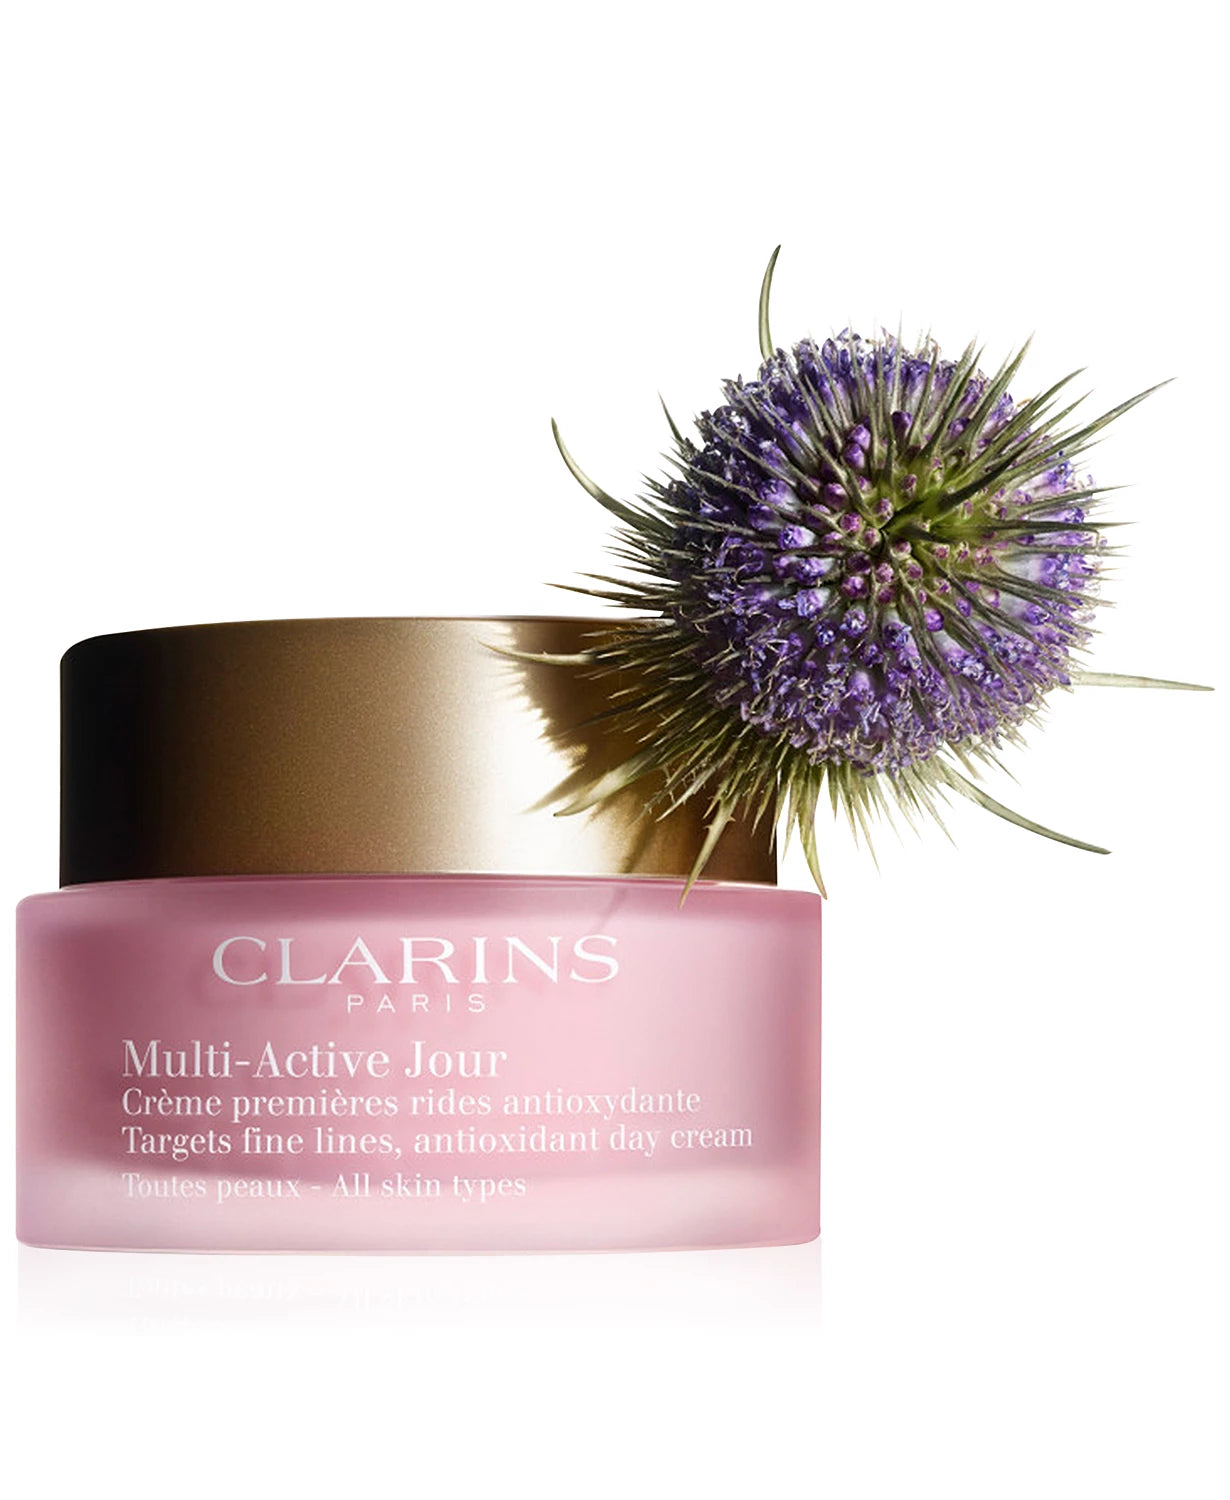 Multi-Active Day Cream - For Dry Skin